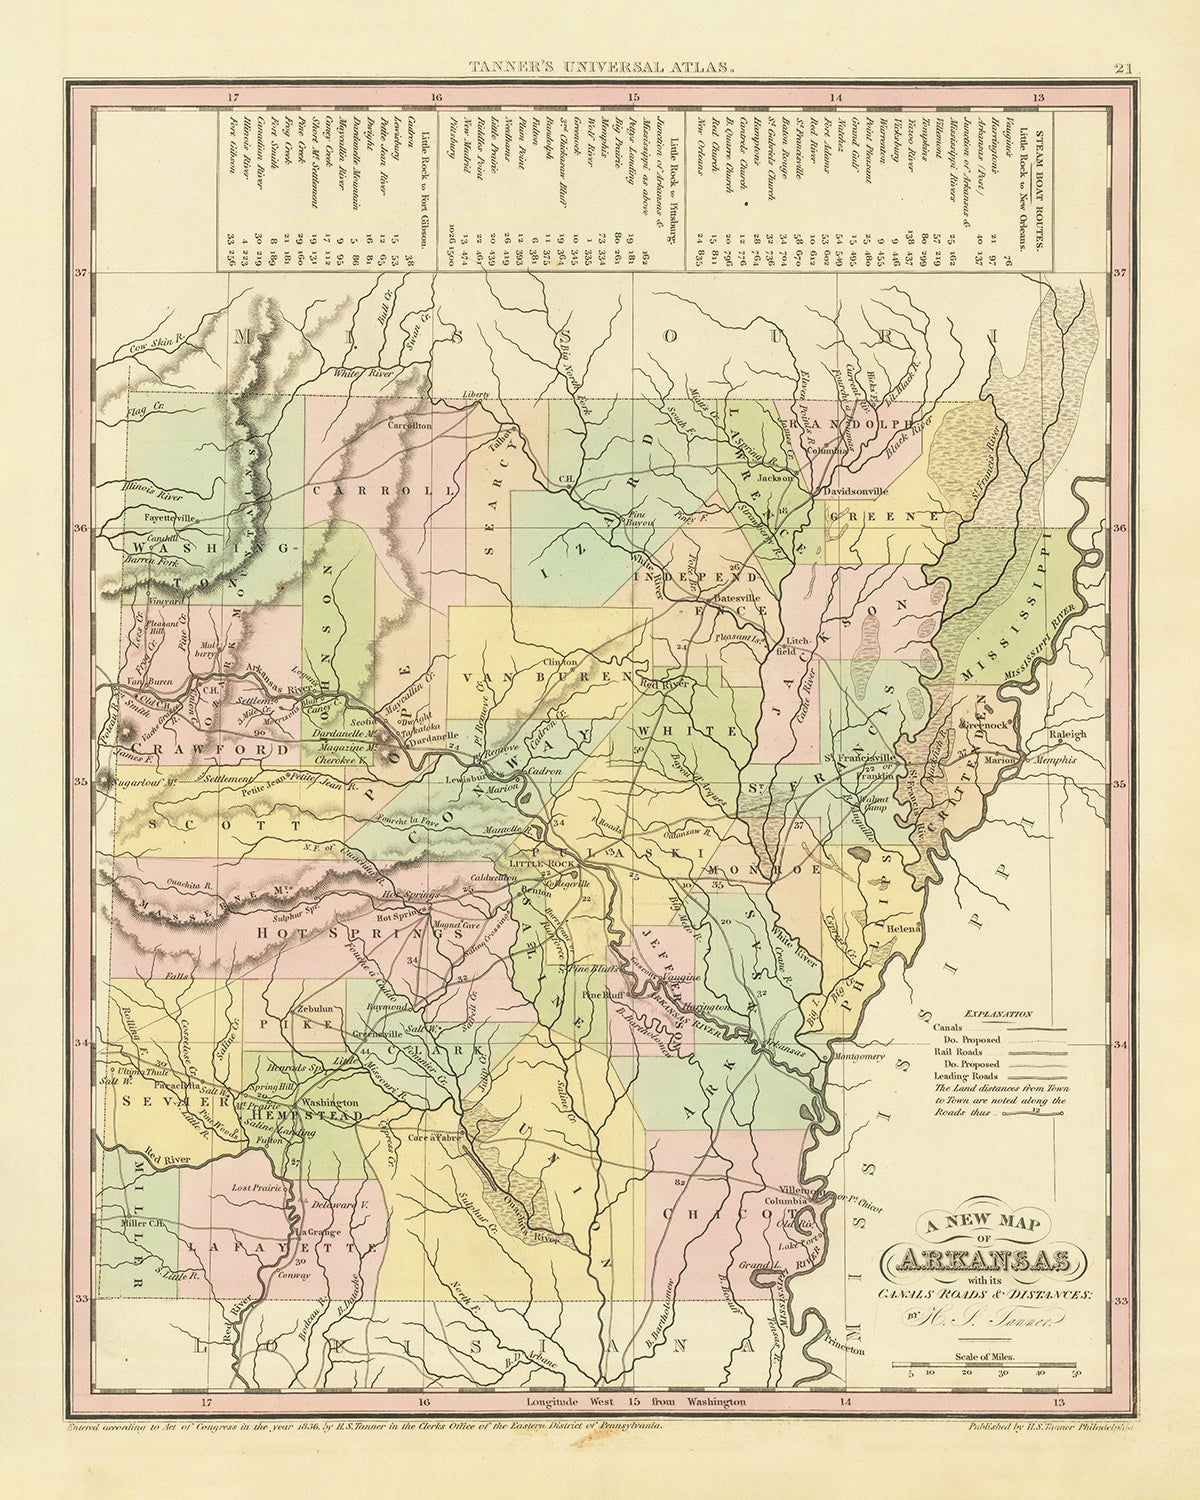 Old Map of Arkansas by H. S. Tanner, 1836: Little Rock, Fort Smith, Pine Bluff, Batesville, Washington, Roads, Railway, Canals